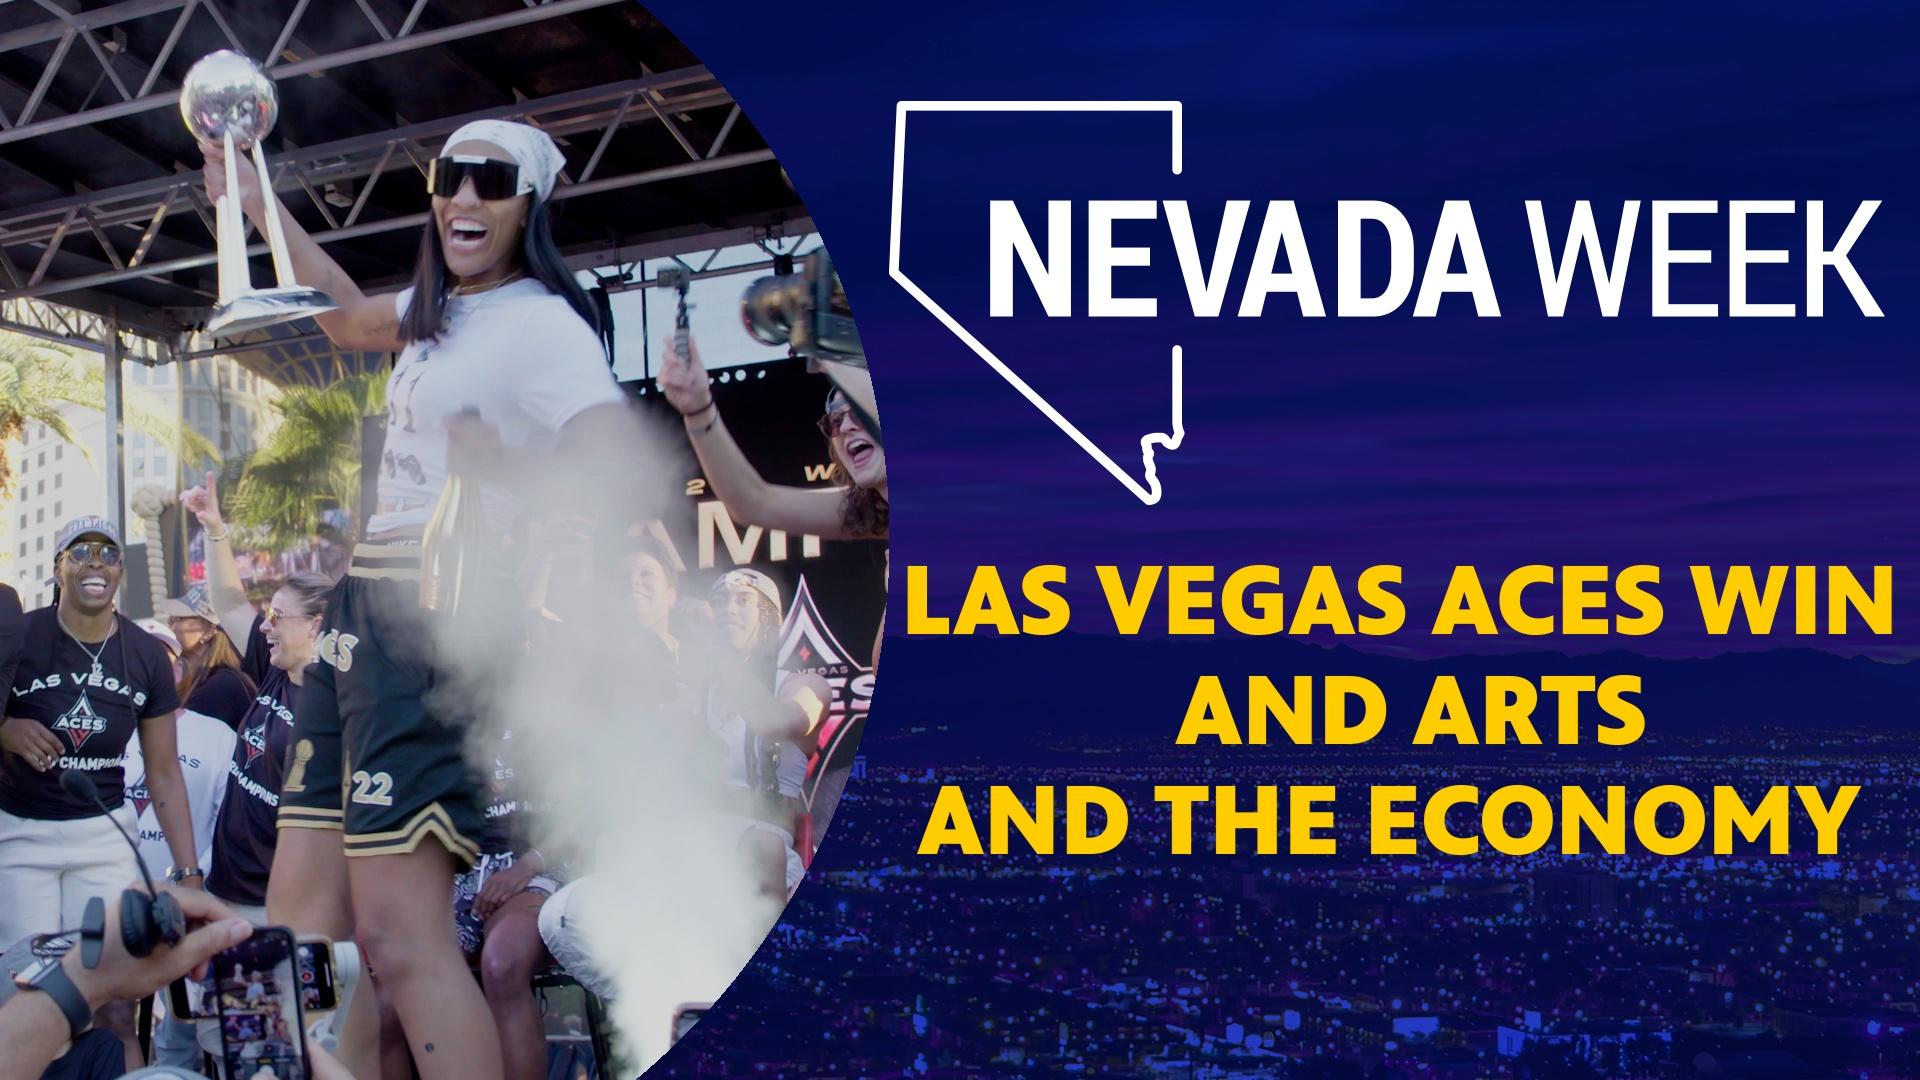 Las Vegas Aces Win and Arts and the Economy